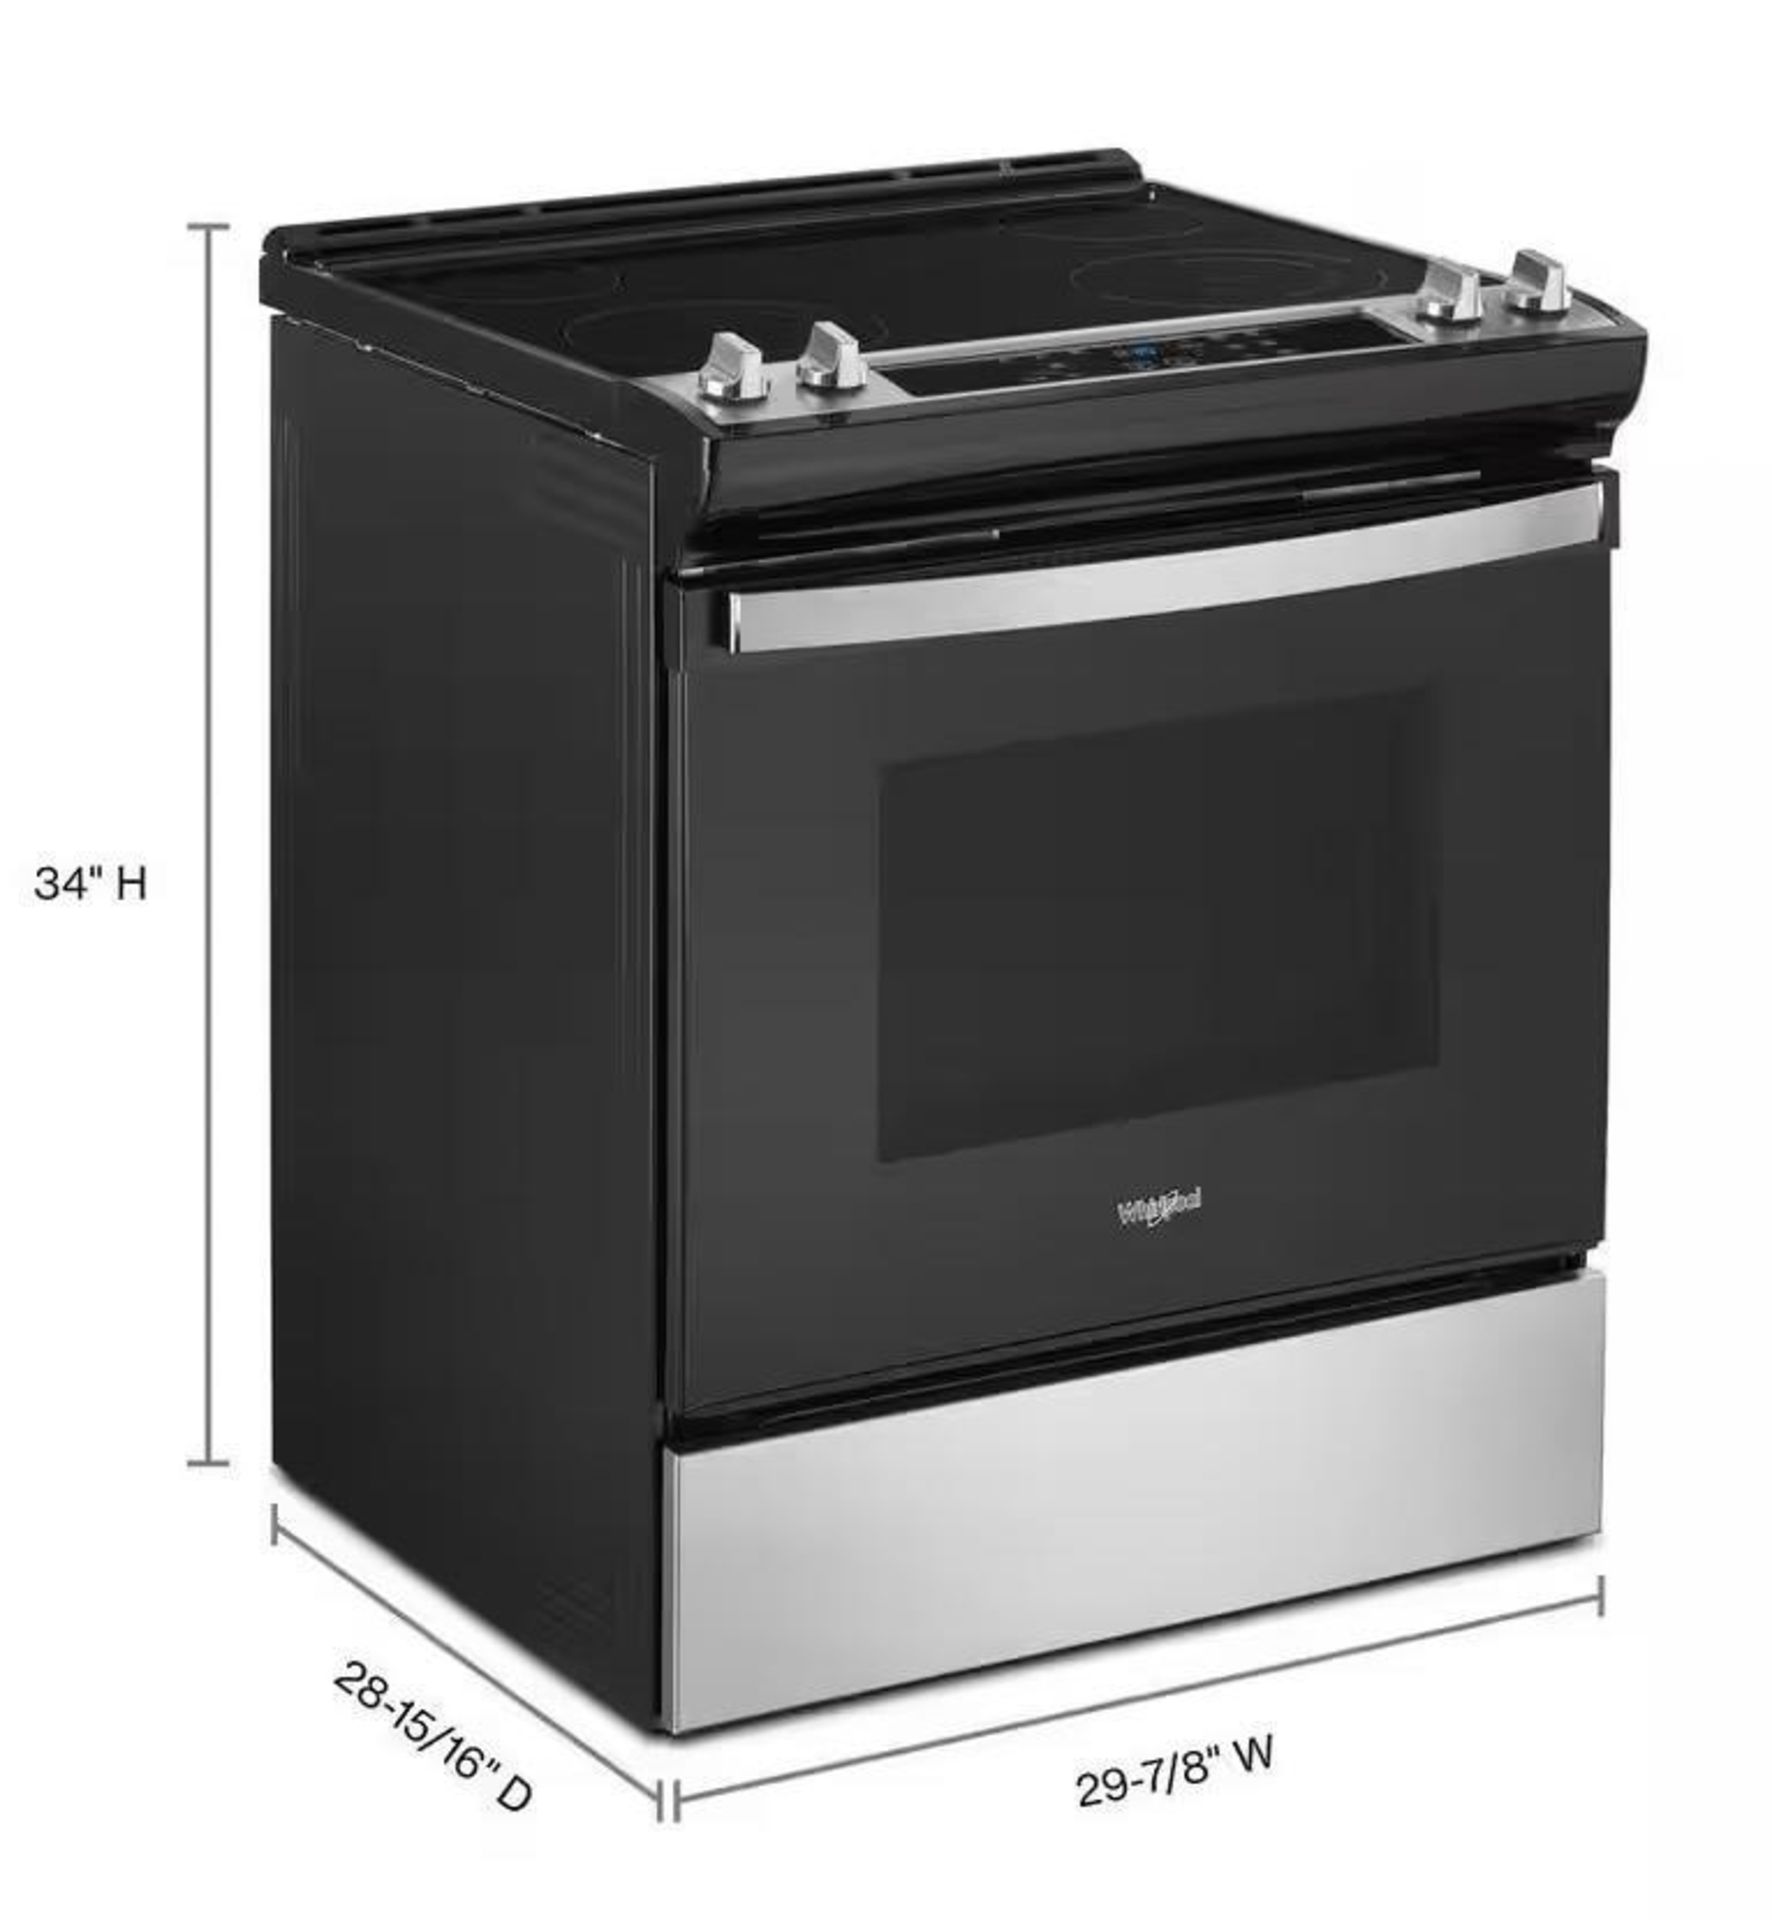 Whirlpool Model: wee515sols2  30" 4.8 Cu. ft Electric Range in Stainless Steel.  (Oven is new has ne - Image 2 of 9